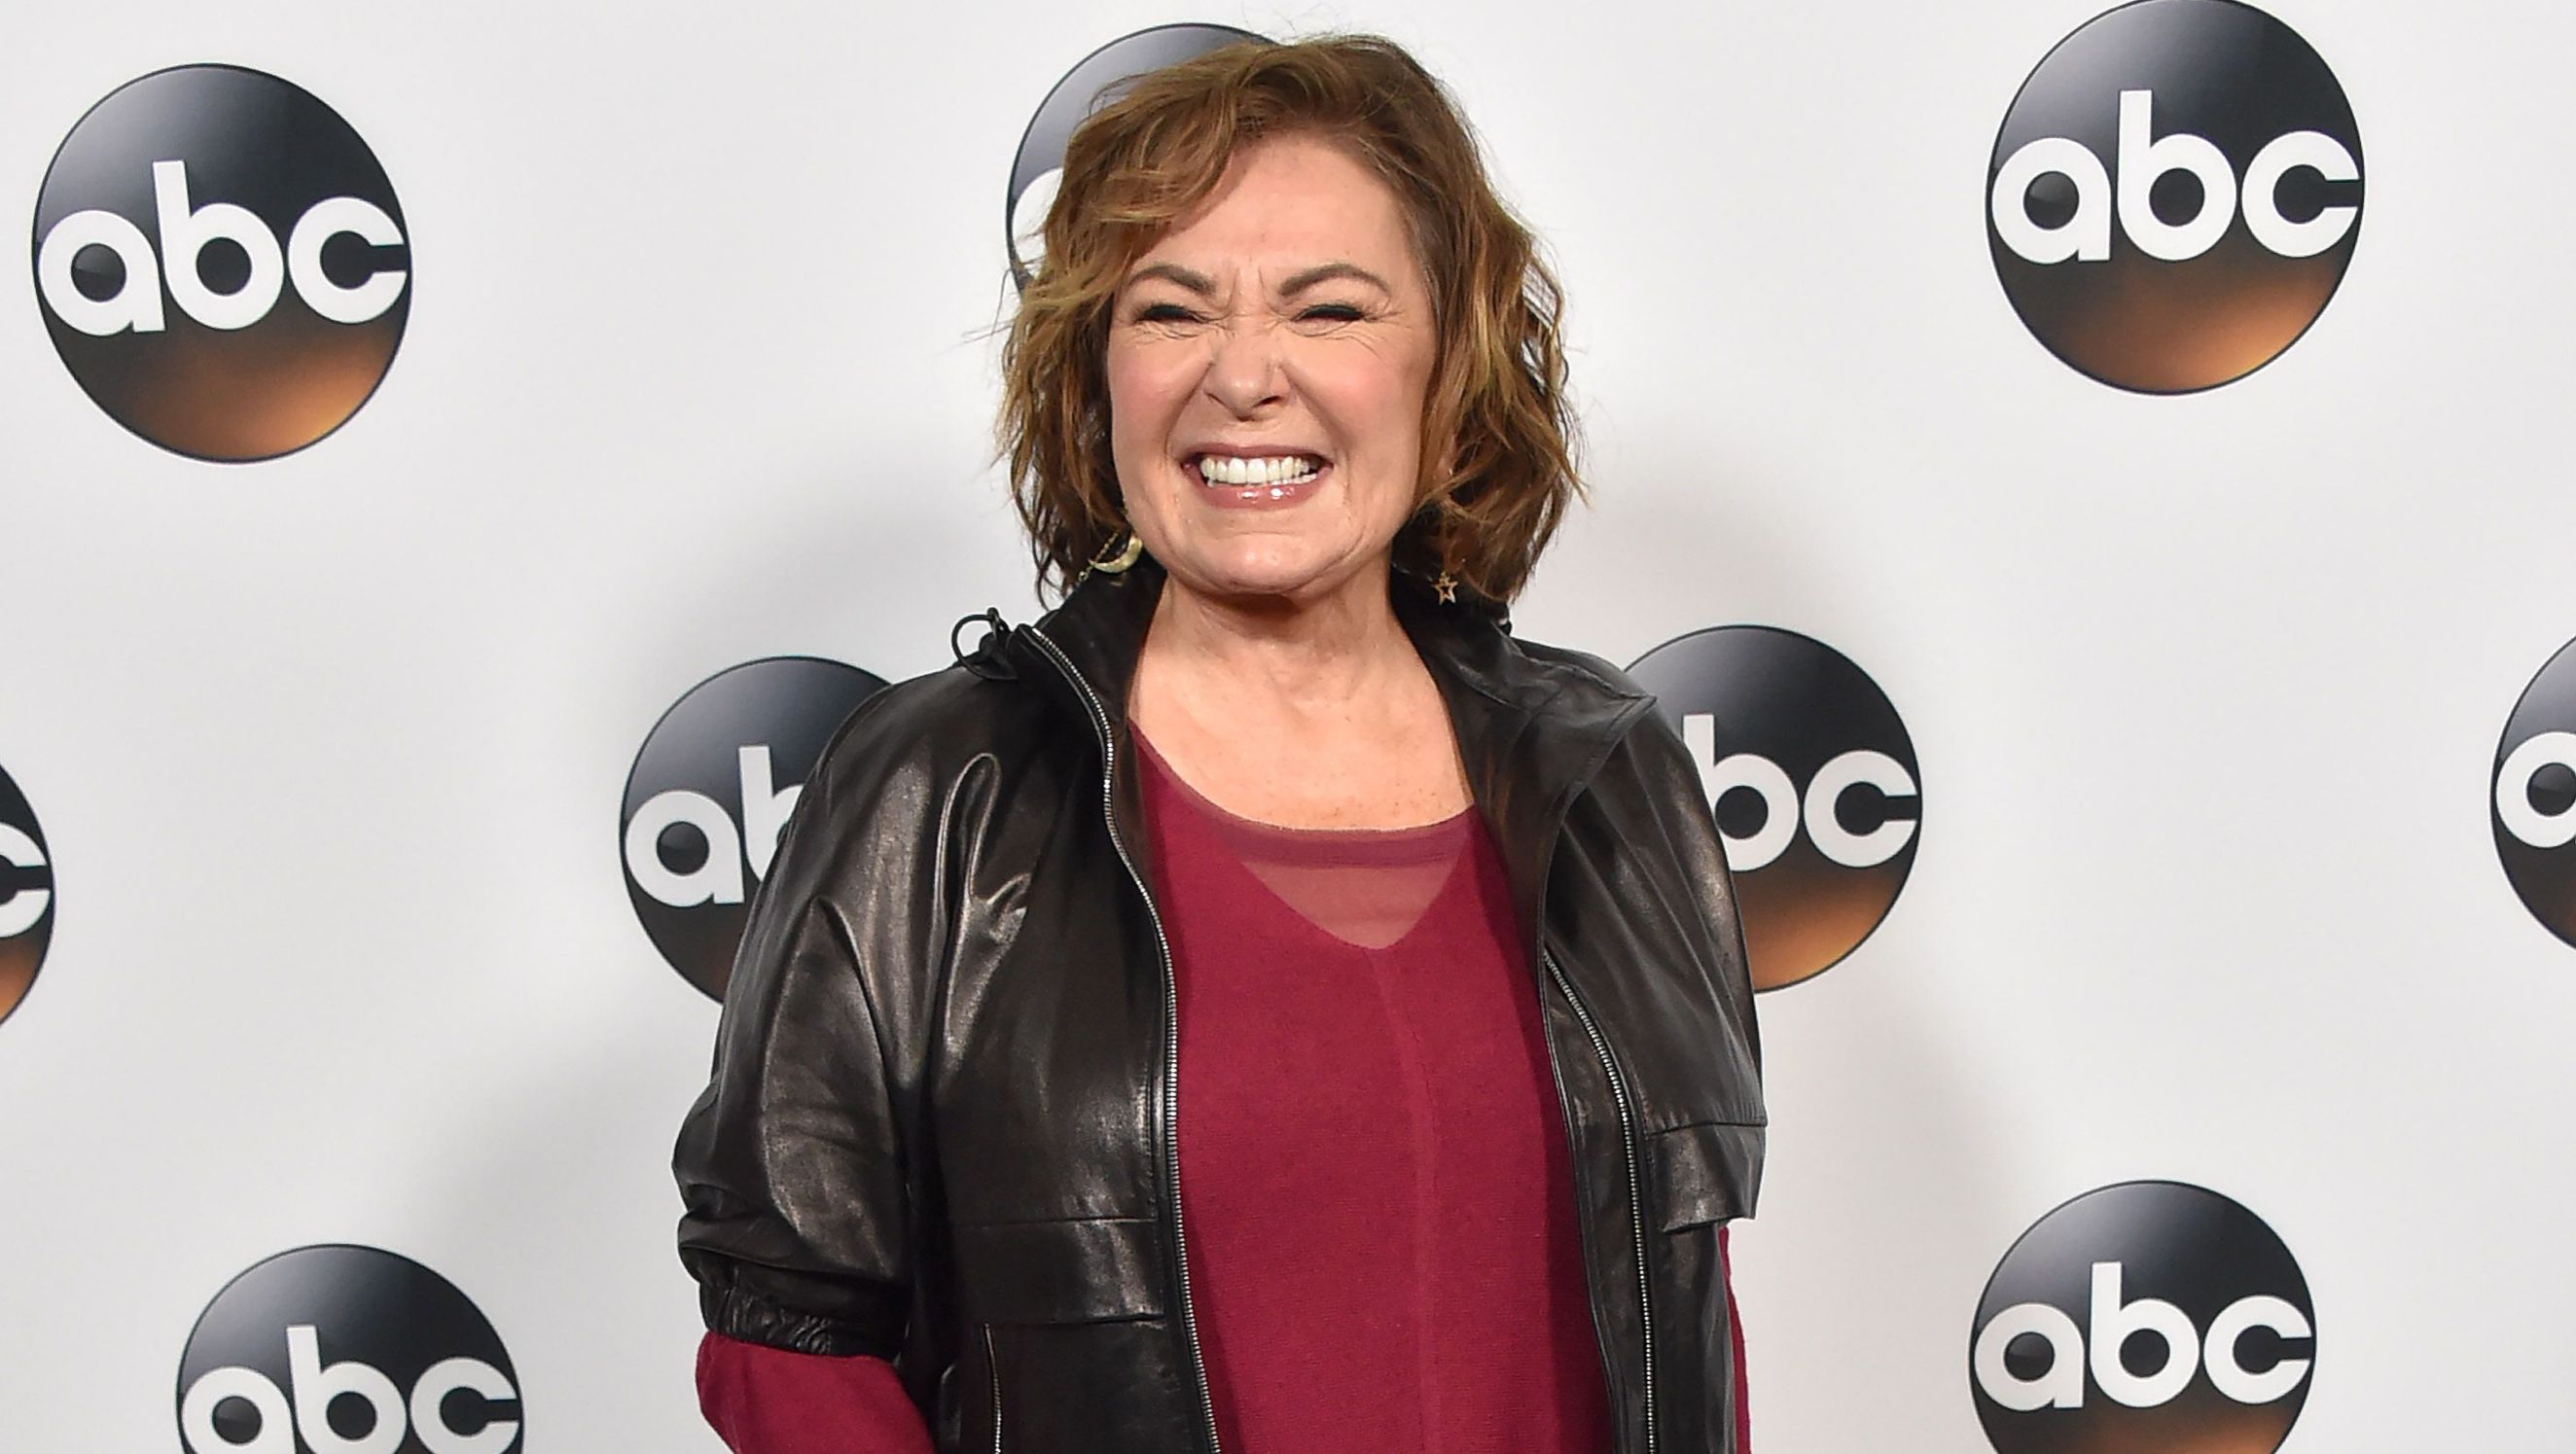 Roseanne Barr wears a red shirt and black jacket.